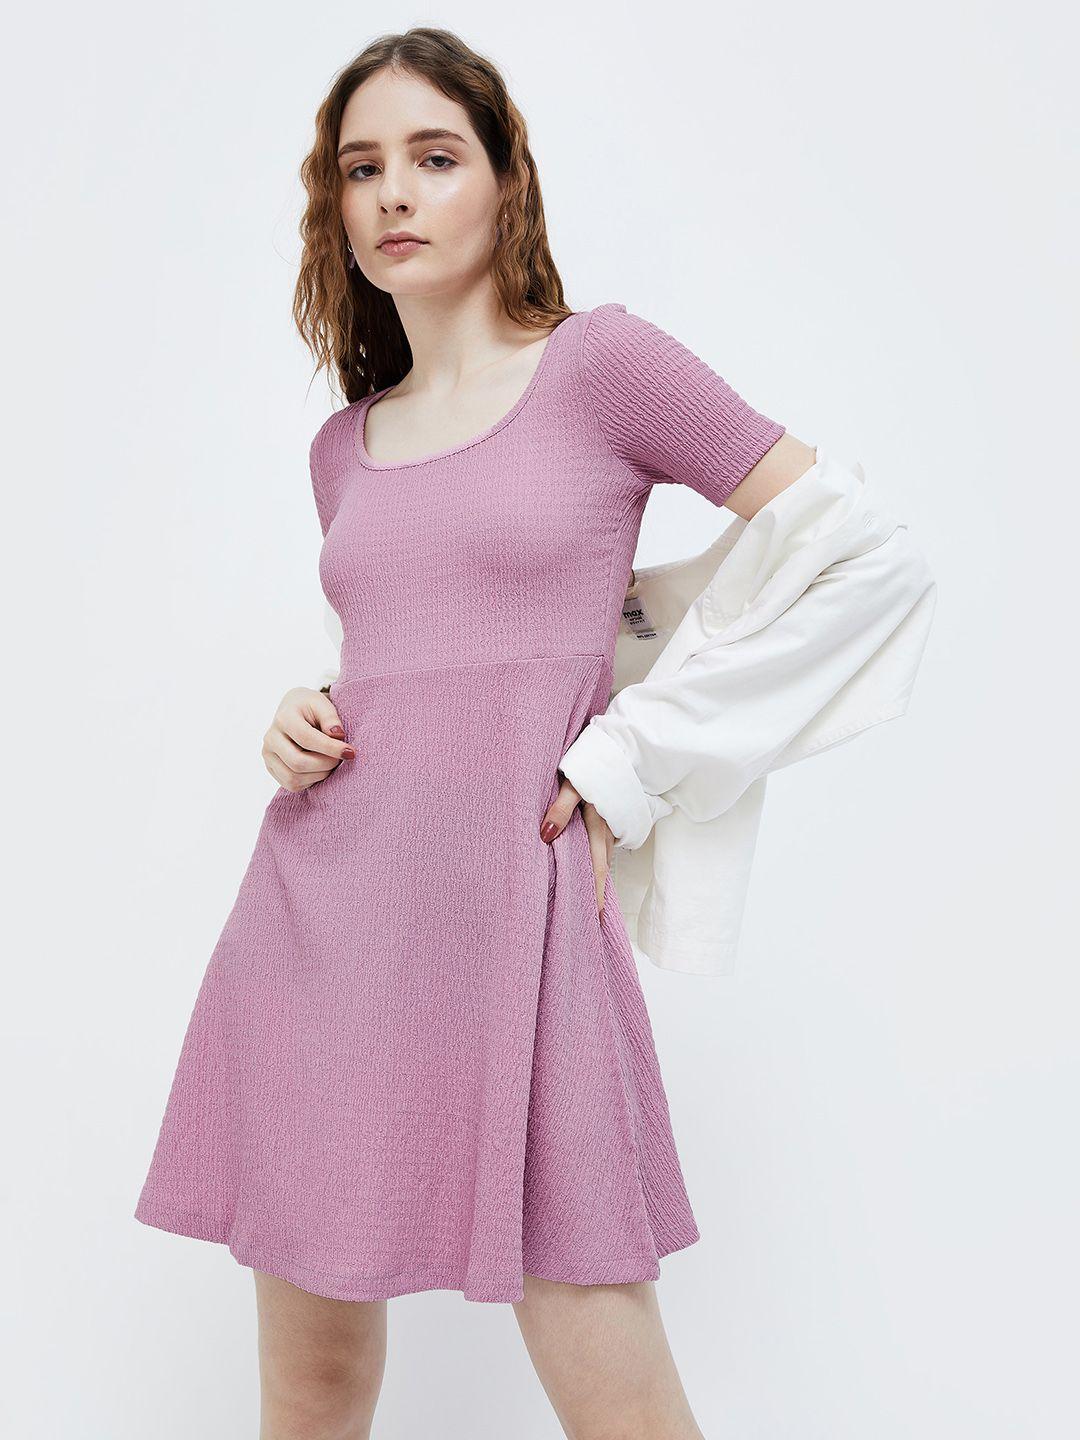 ginger-by-lifestyle-round-neck-short-sleeves-a-line-dress